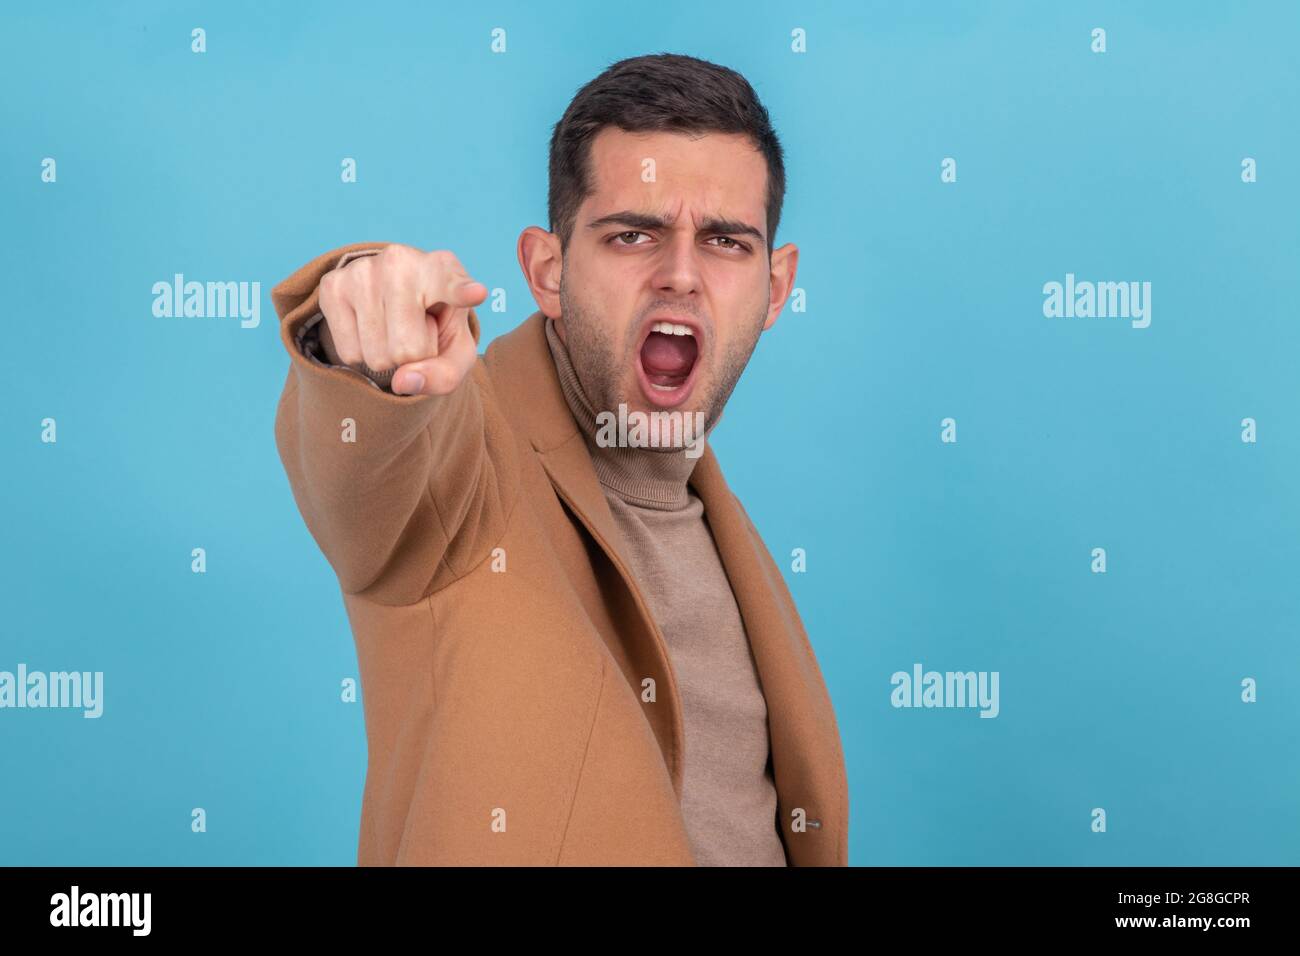 man screaming and pointing furious isolated on background Stock Photo